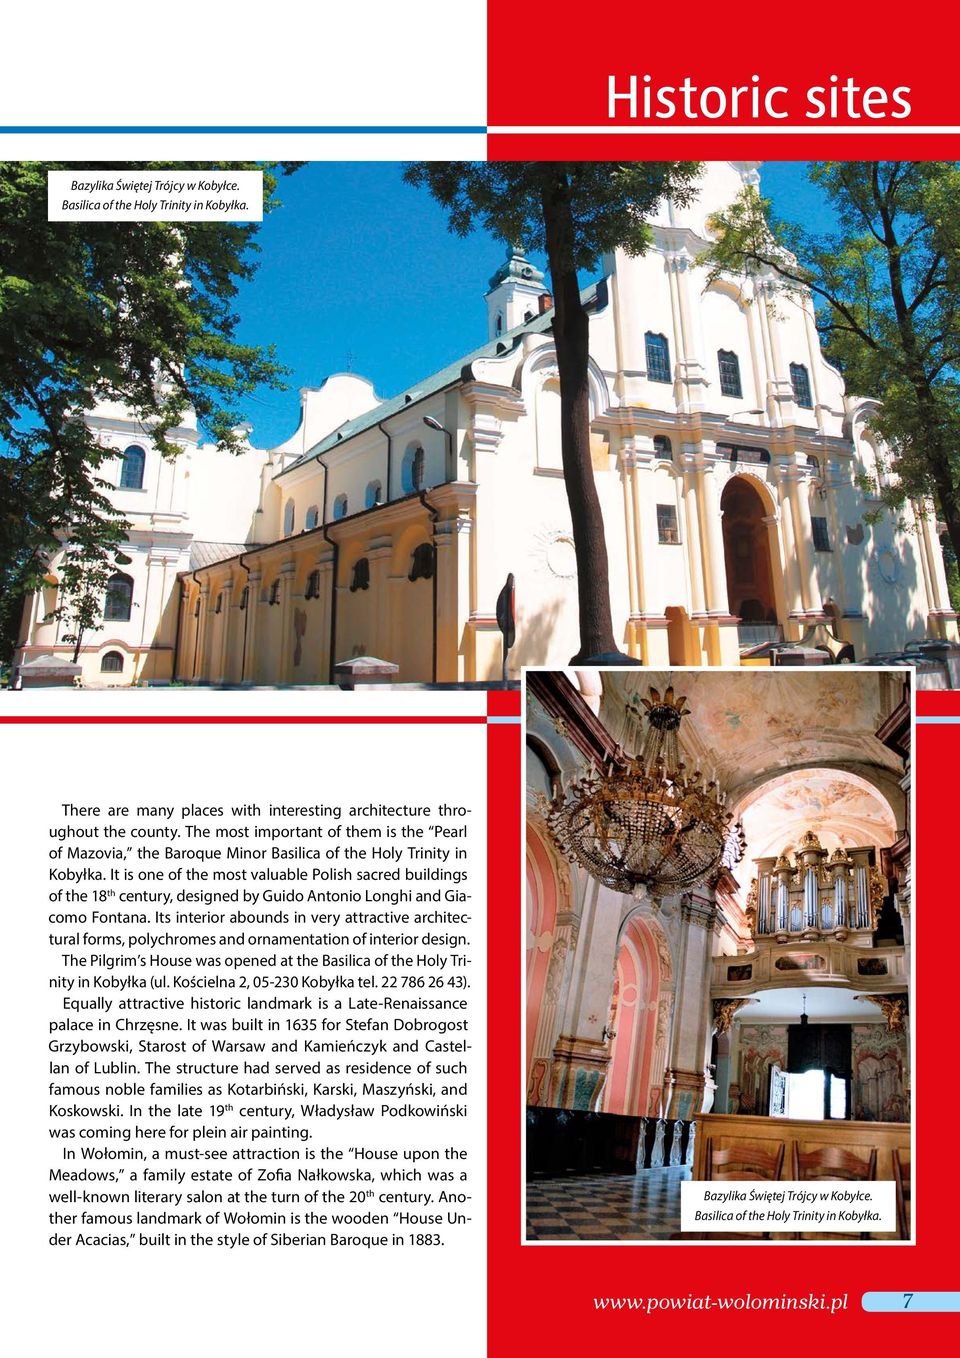 It is one of the most valuable Polish sacred buildings of the 18 th century, designed by Guido Antonio Longhi and Giacomo Fontana.